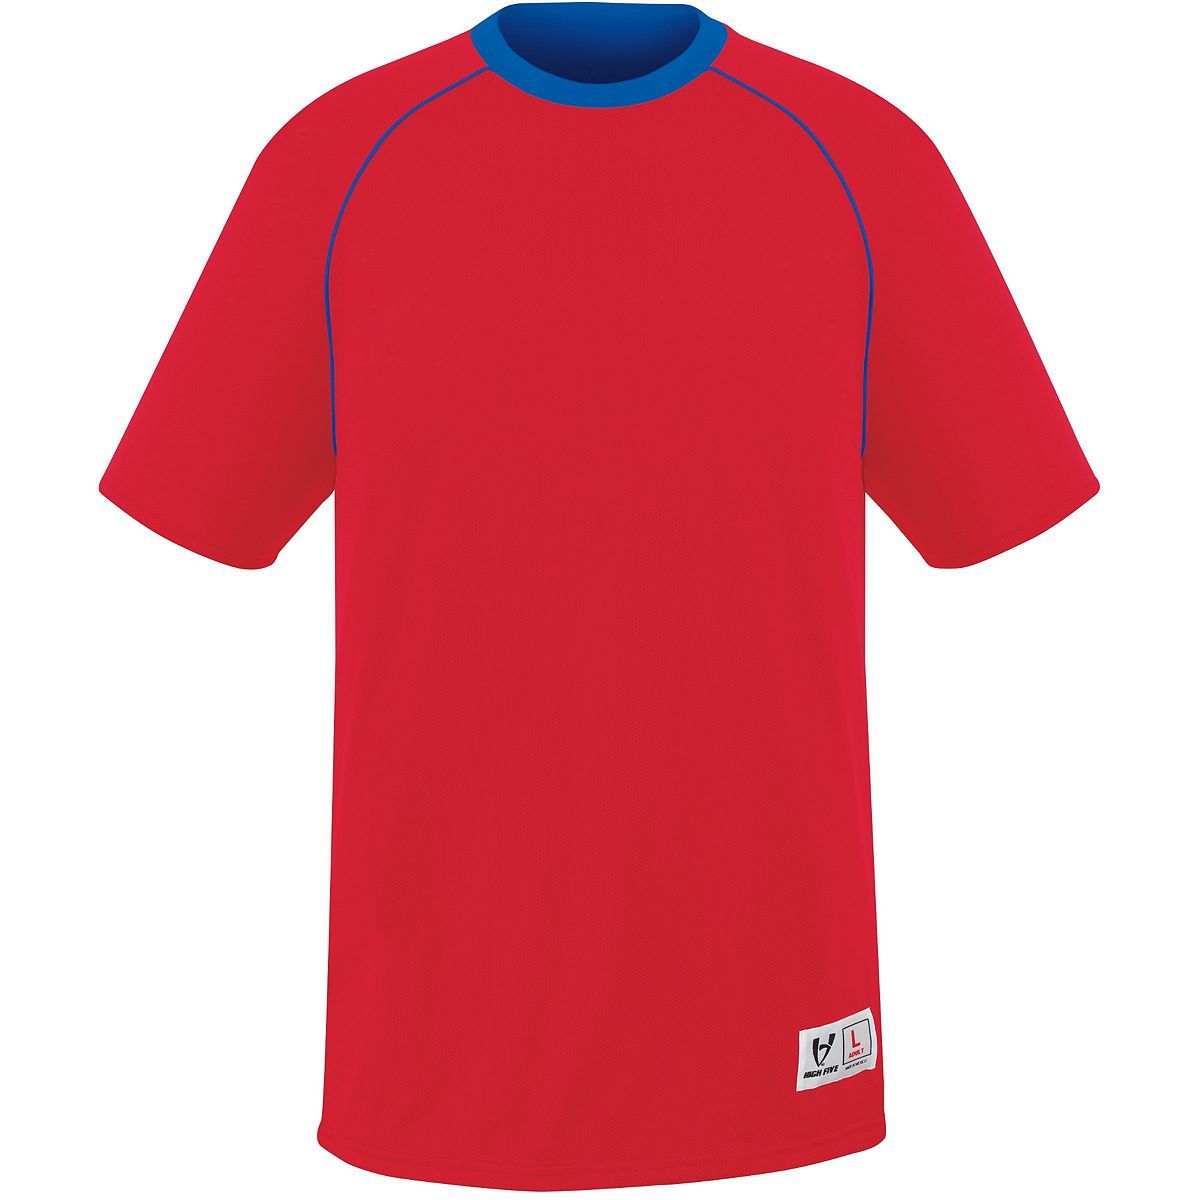 High 5 Conversion Reversible Jersey in Scarlet/Royal  -Part of the Adult, Adult-Jersey, High5-Products, Soccer, Shirts, All-Sports-1 product lines at KanaleyCreations.com